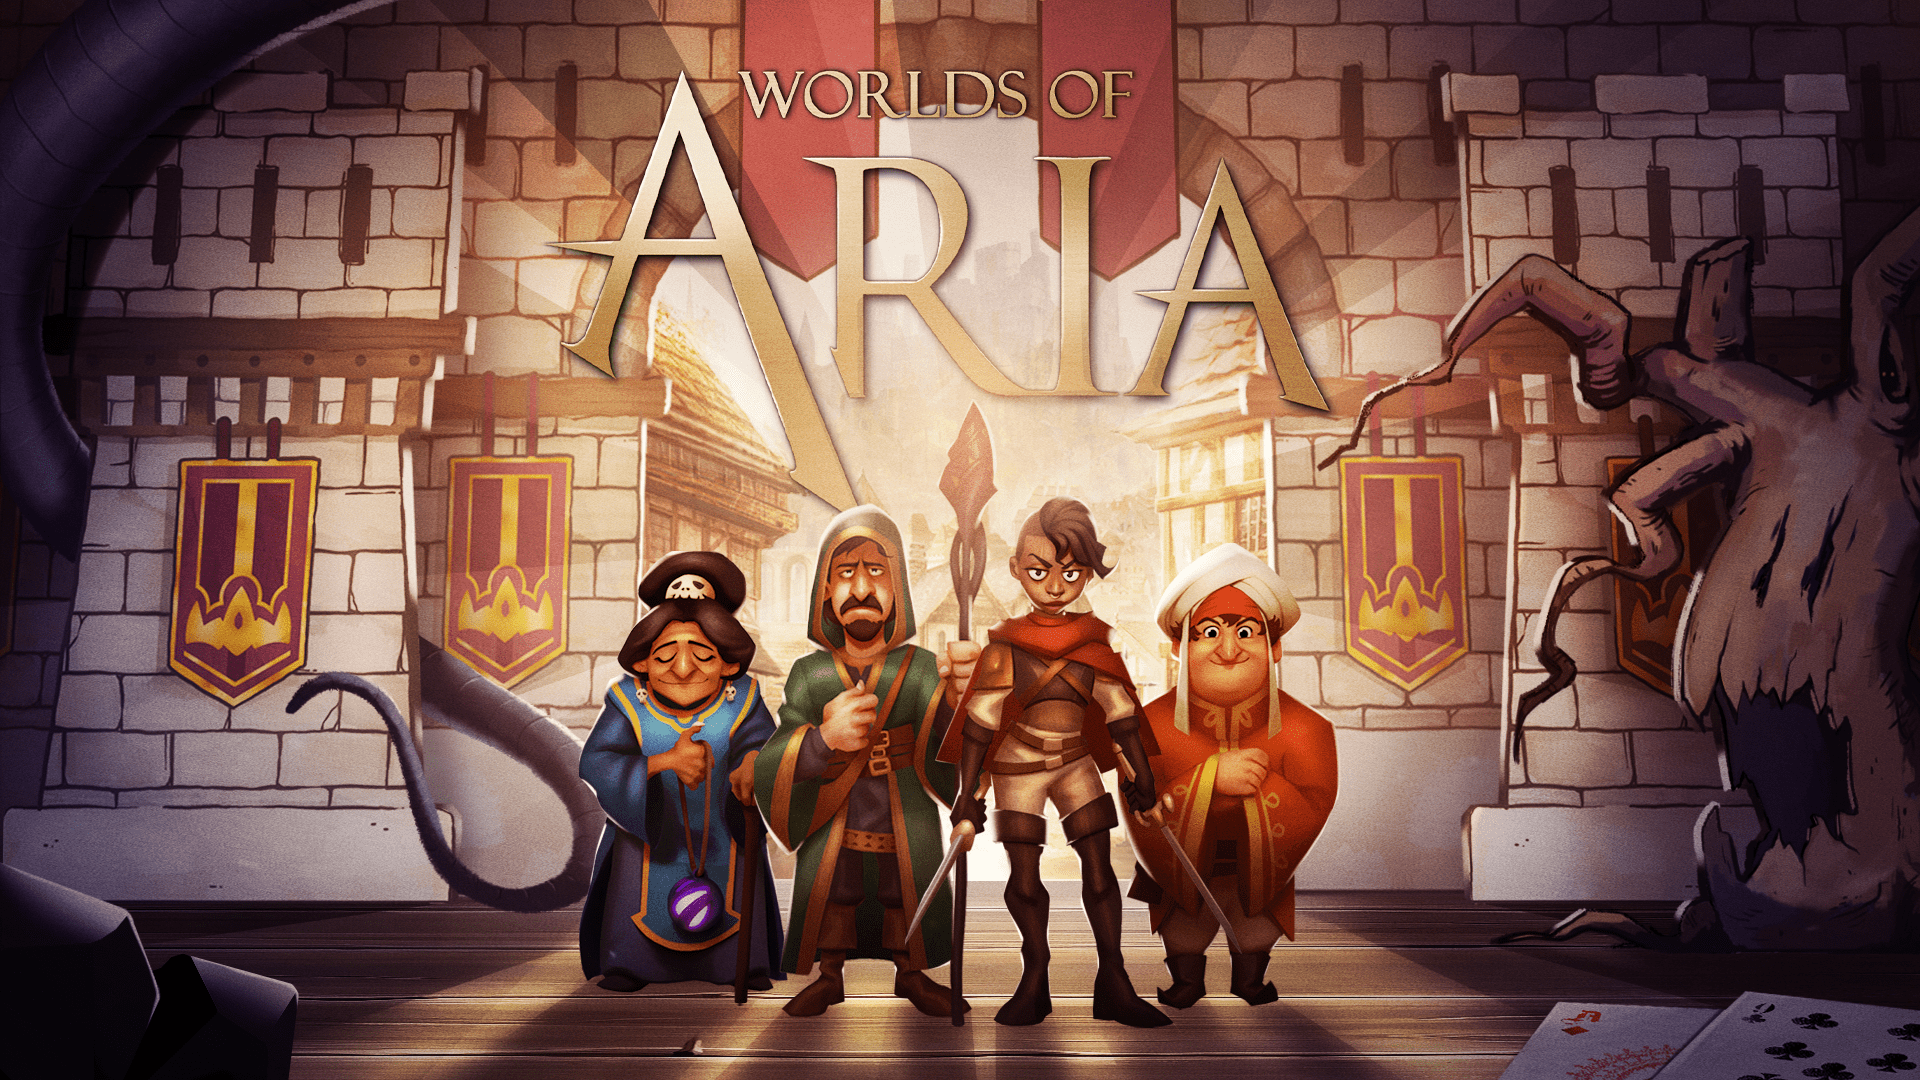 Official keyart of the video game Worlds of Aria, with the four main heroes (Warrior, Witch, Mage and Merchant) in front of the open doors of the Kingdom of Aria.